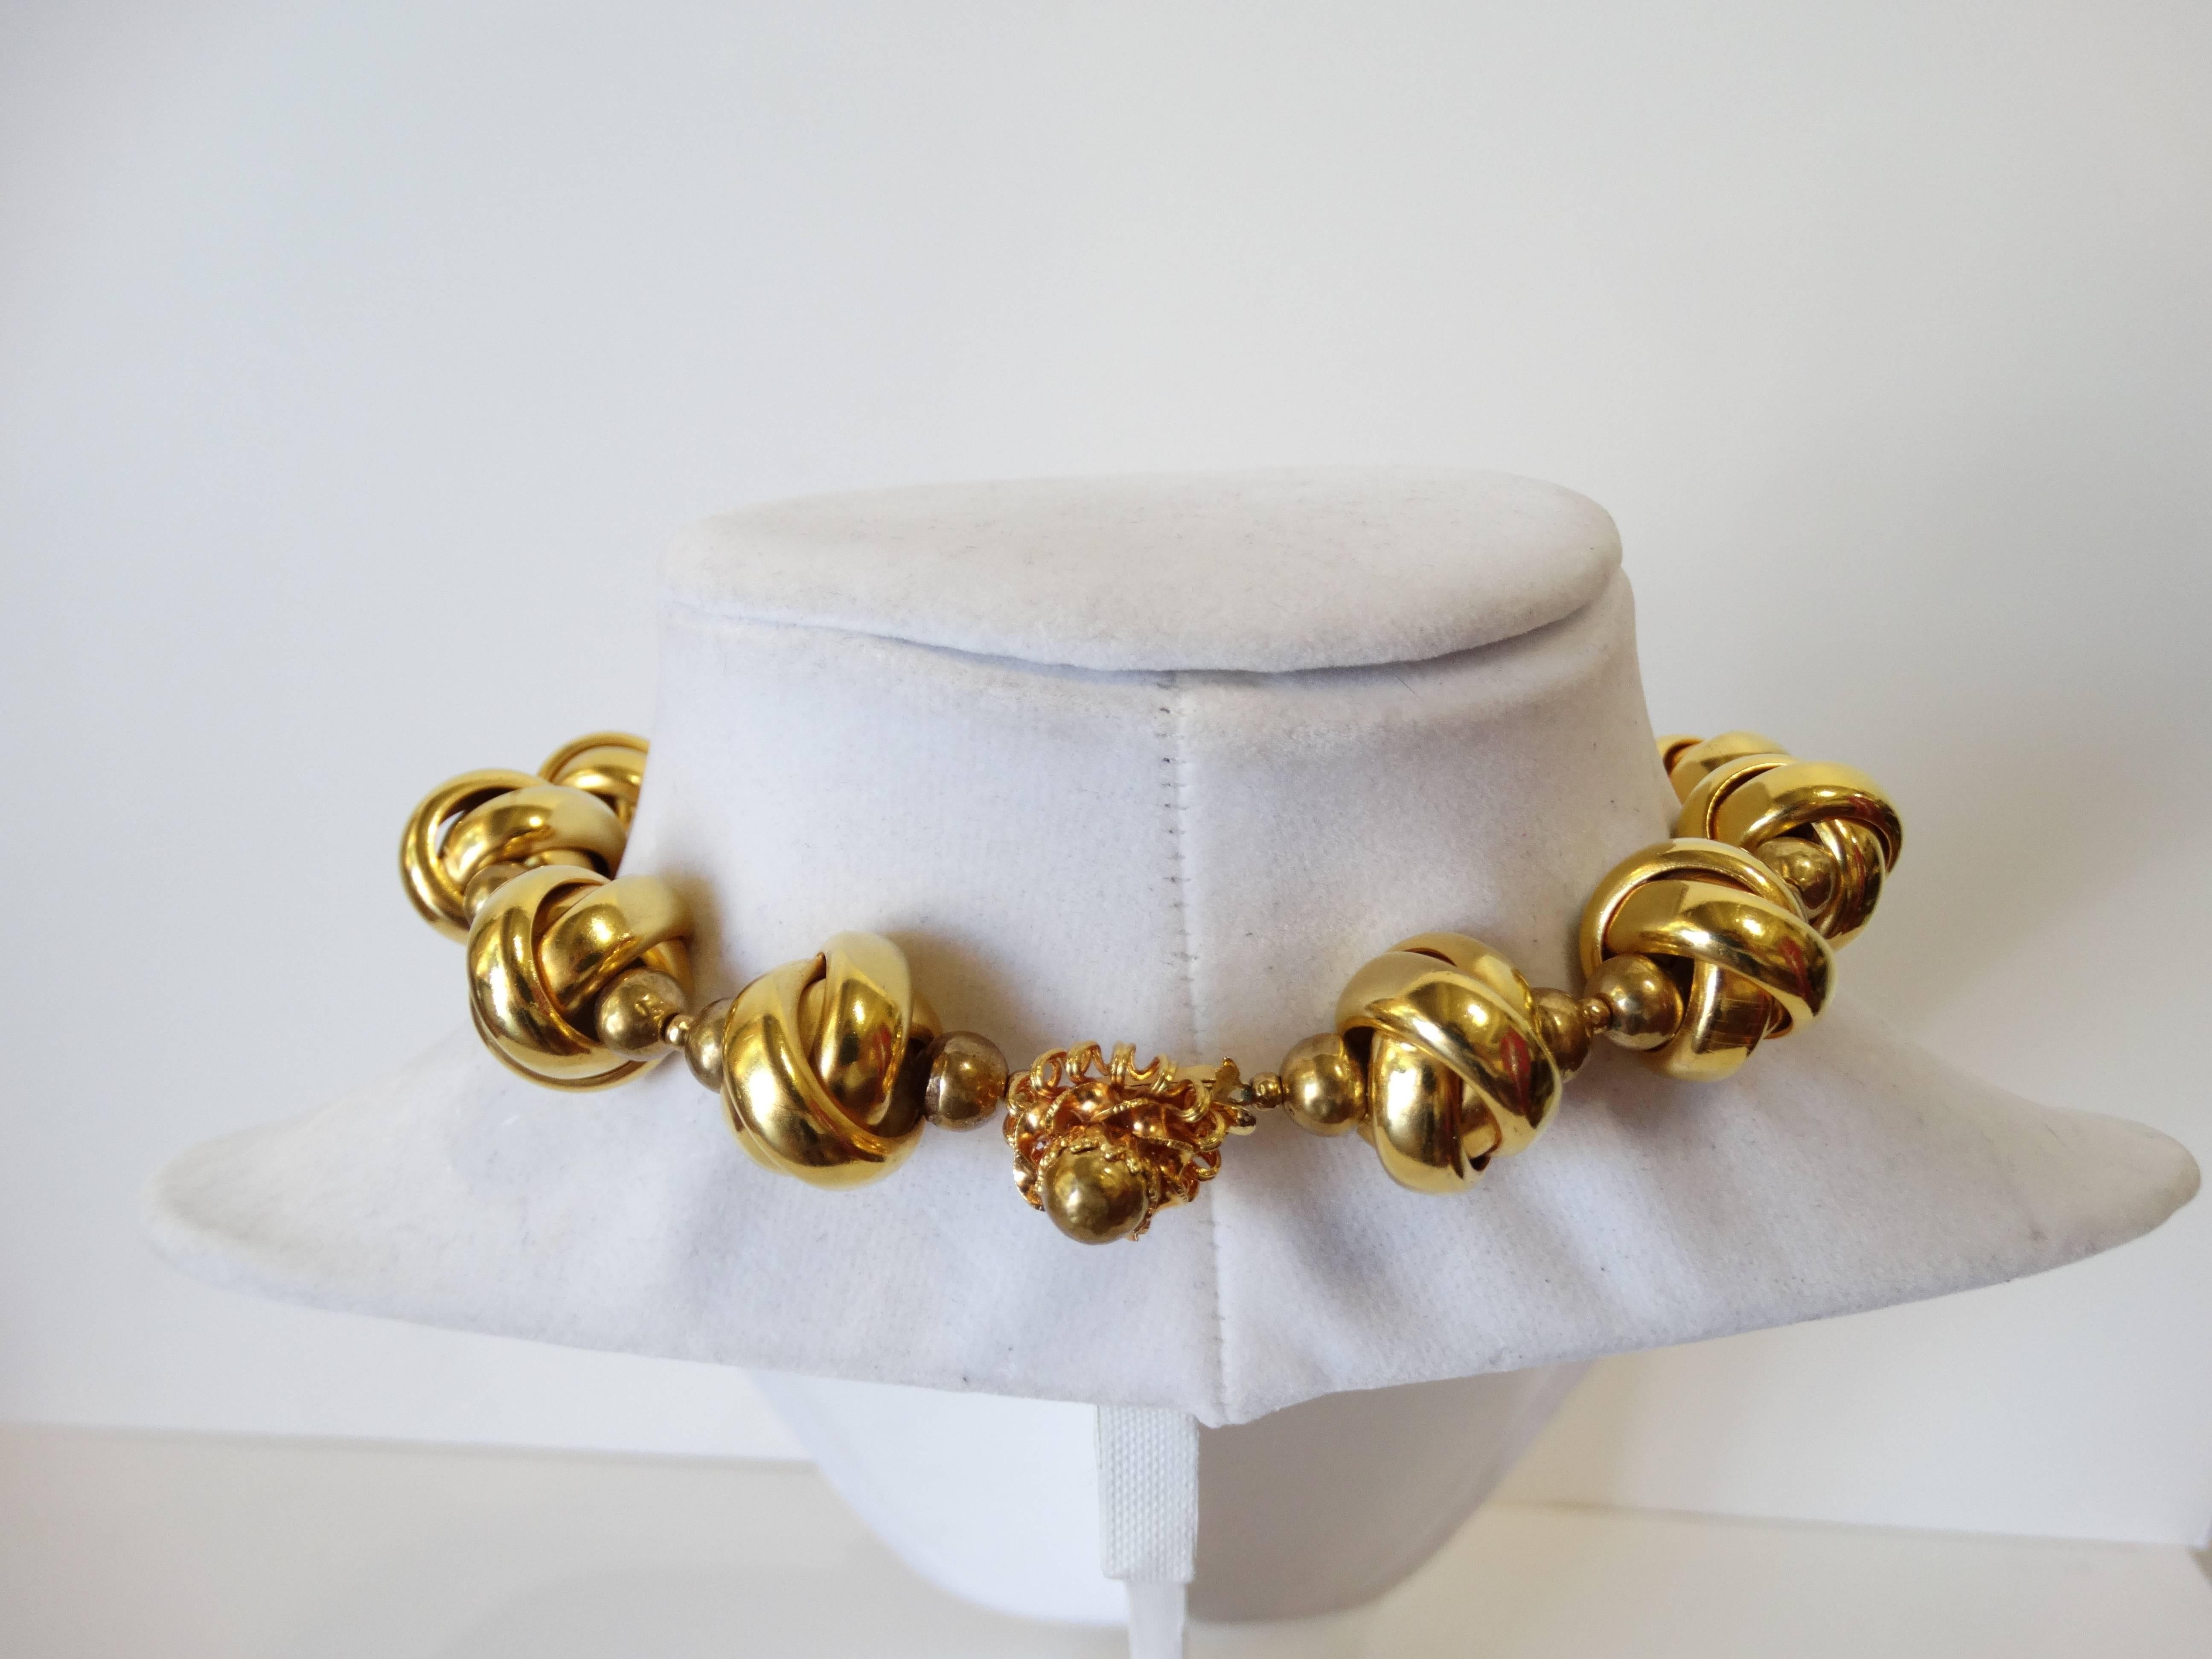 Amazing 1970s William De Lillo Necklace! Knot shaped beads cast in a brilliant gold metal. 3 knots dangle in the center Closure at the back of the neck. Signed at the back of the clasp. Delillo Great statement necklace 

Total length 16 inches